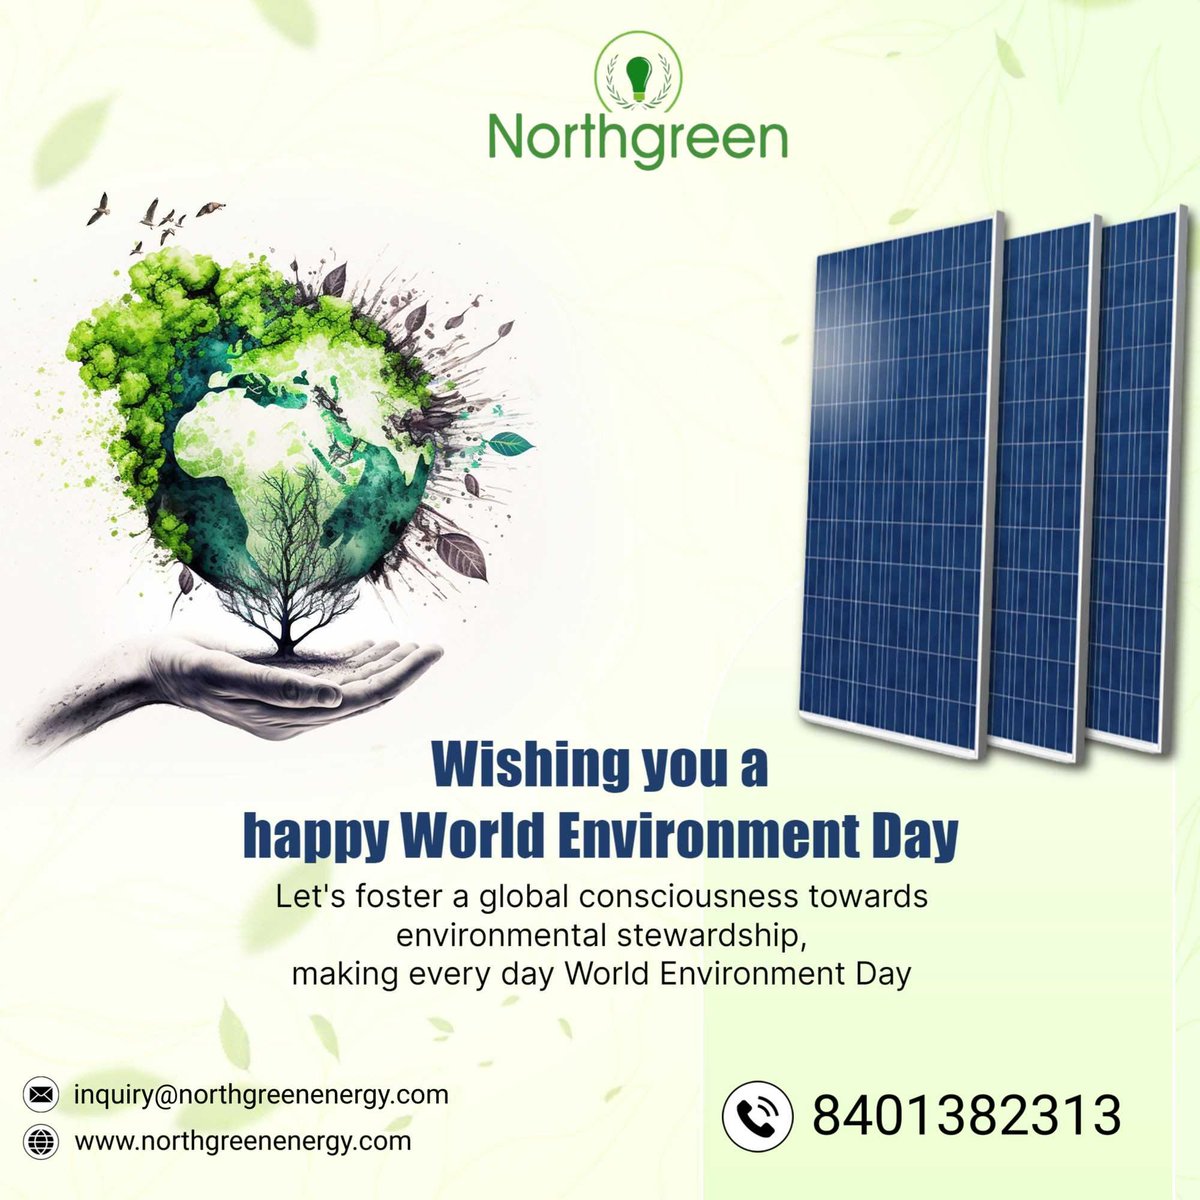 Greetings from Northgreen Energy Pvt Ltd
  #RespectAuthors #IntellectualPropertyRights #ProtectIntellectualProperty #NoPiracy #BooksMatter #RespectCopyright #ReadingList #SupportAuthors #SayNoToPlagiarism #BookwormsUnite